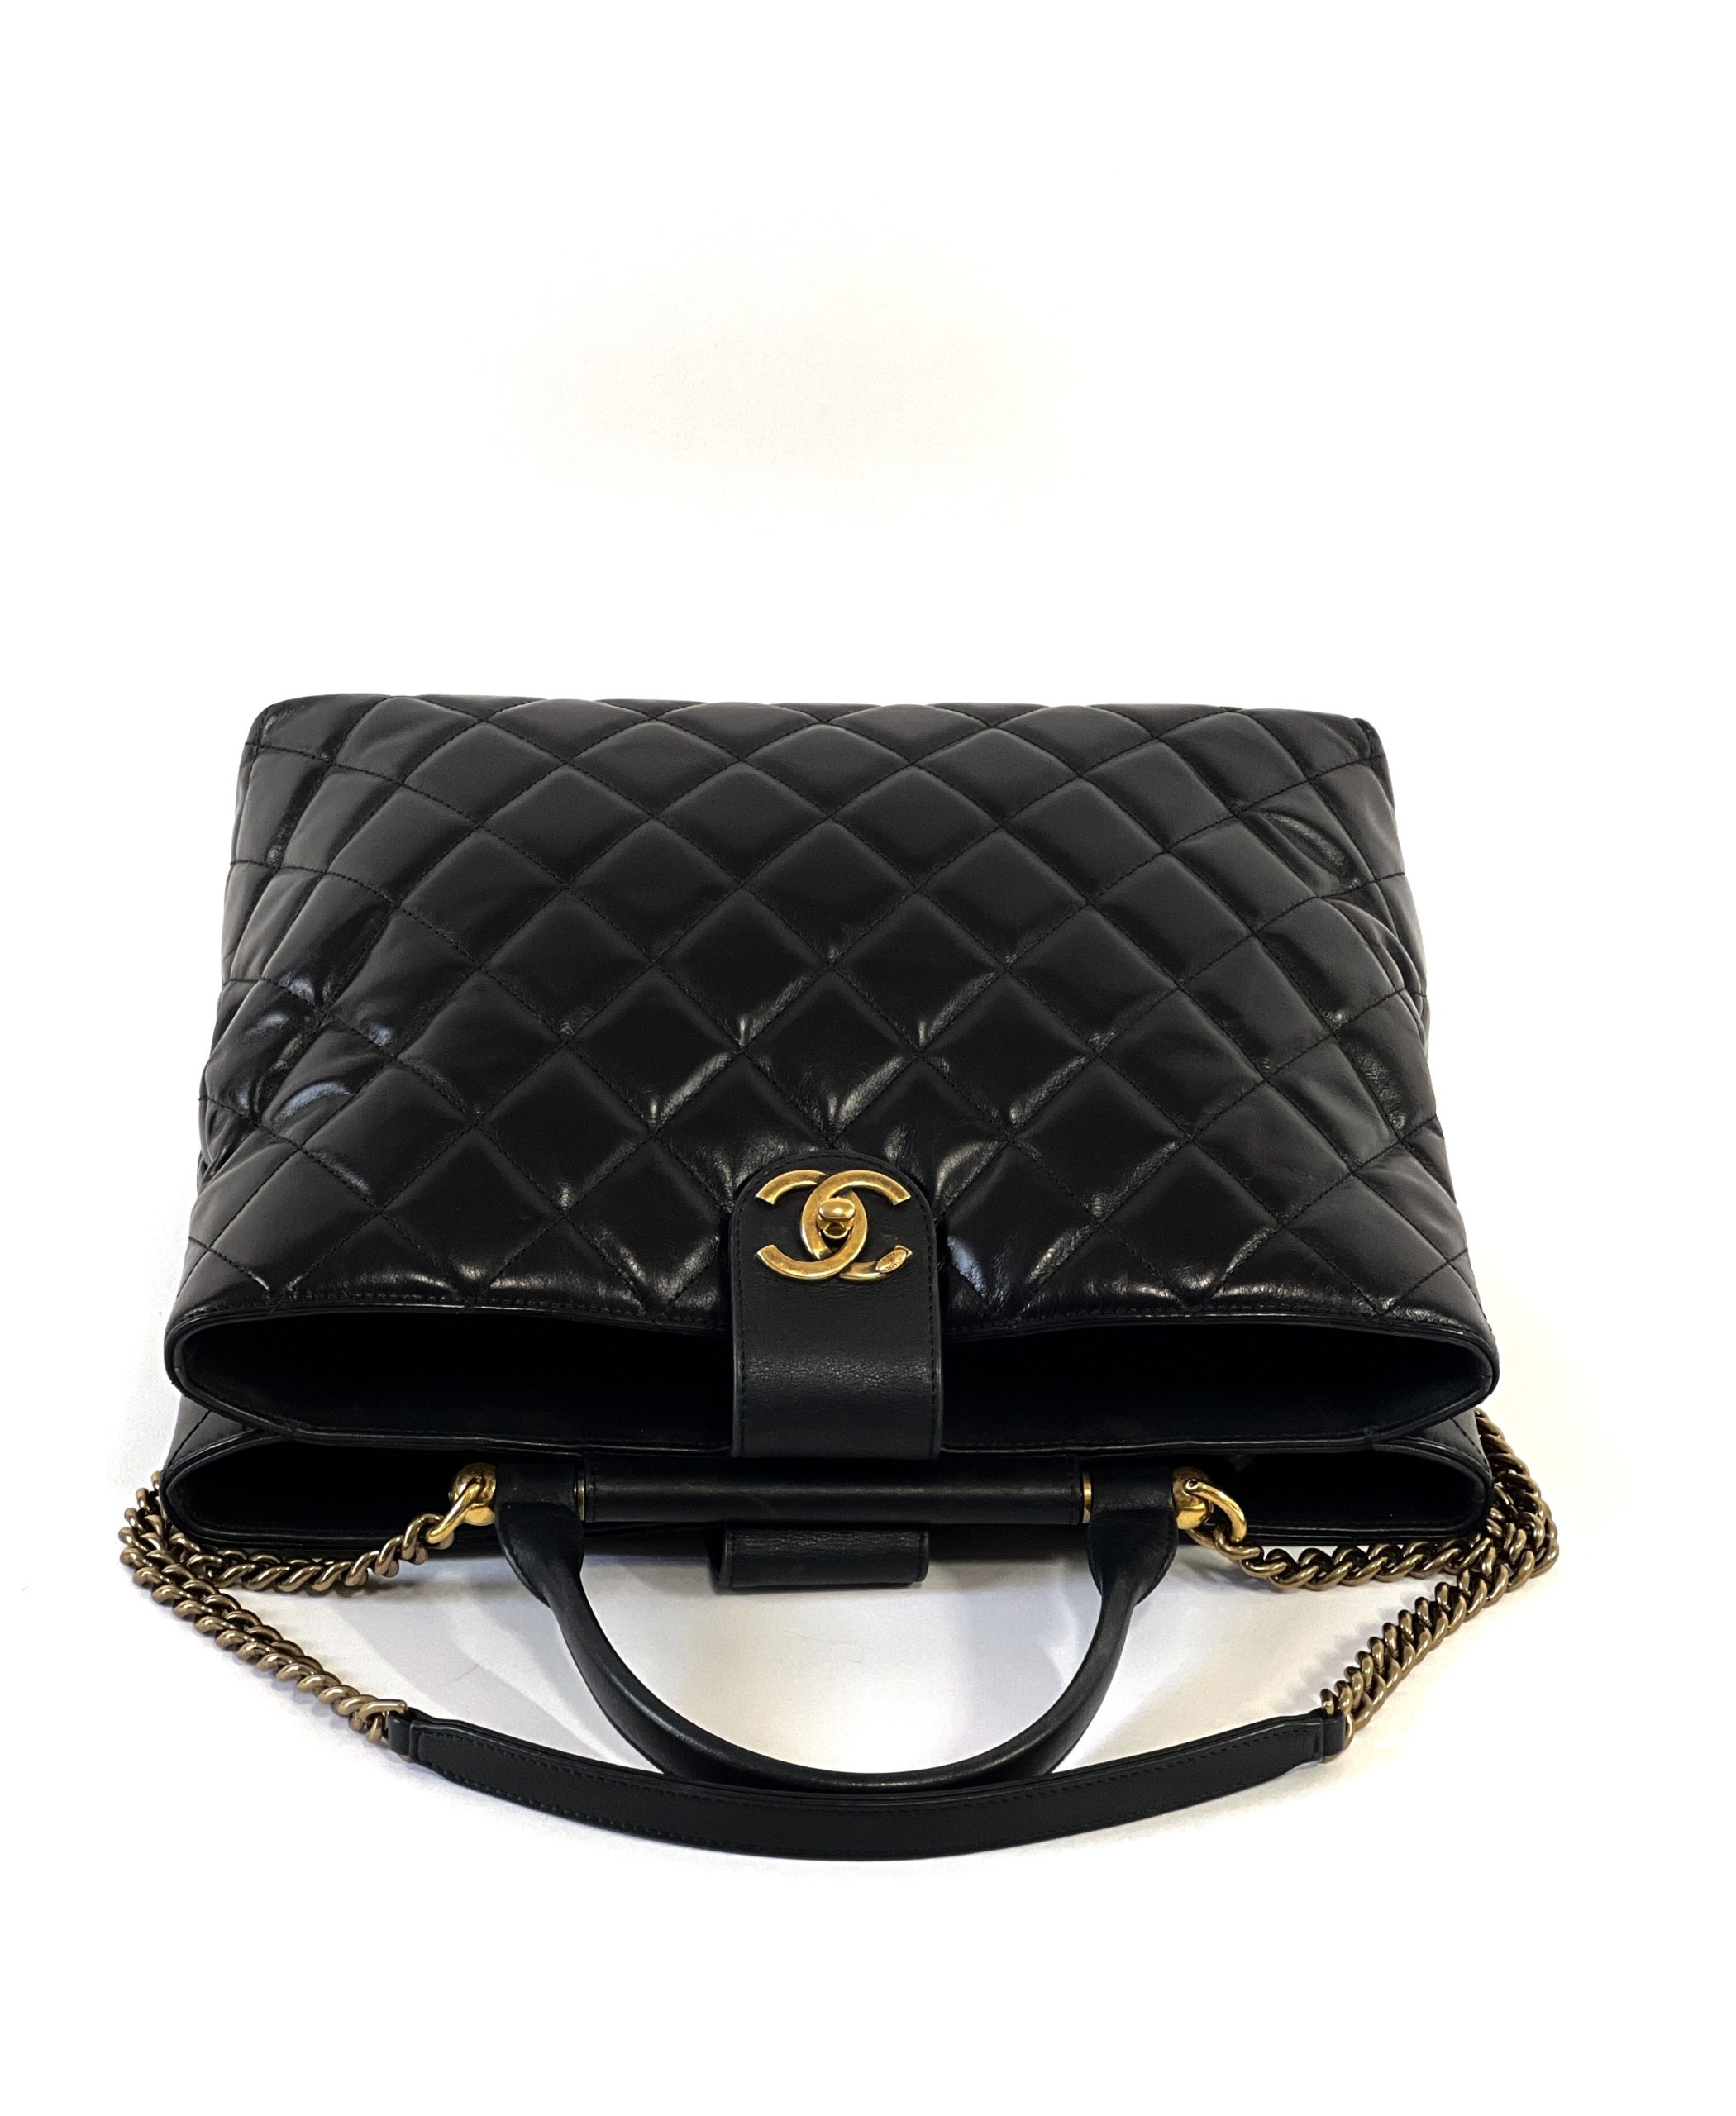 Chanel Black Quilted Aged Calfskin Gabrielle Cosmetics Case Gold